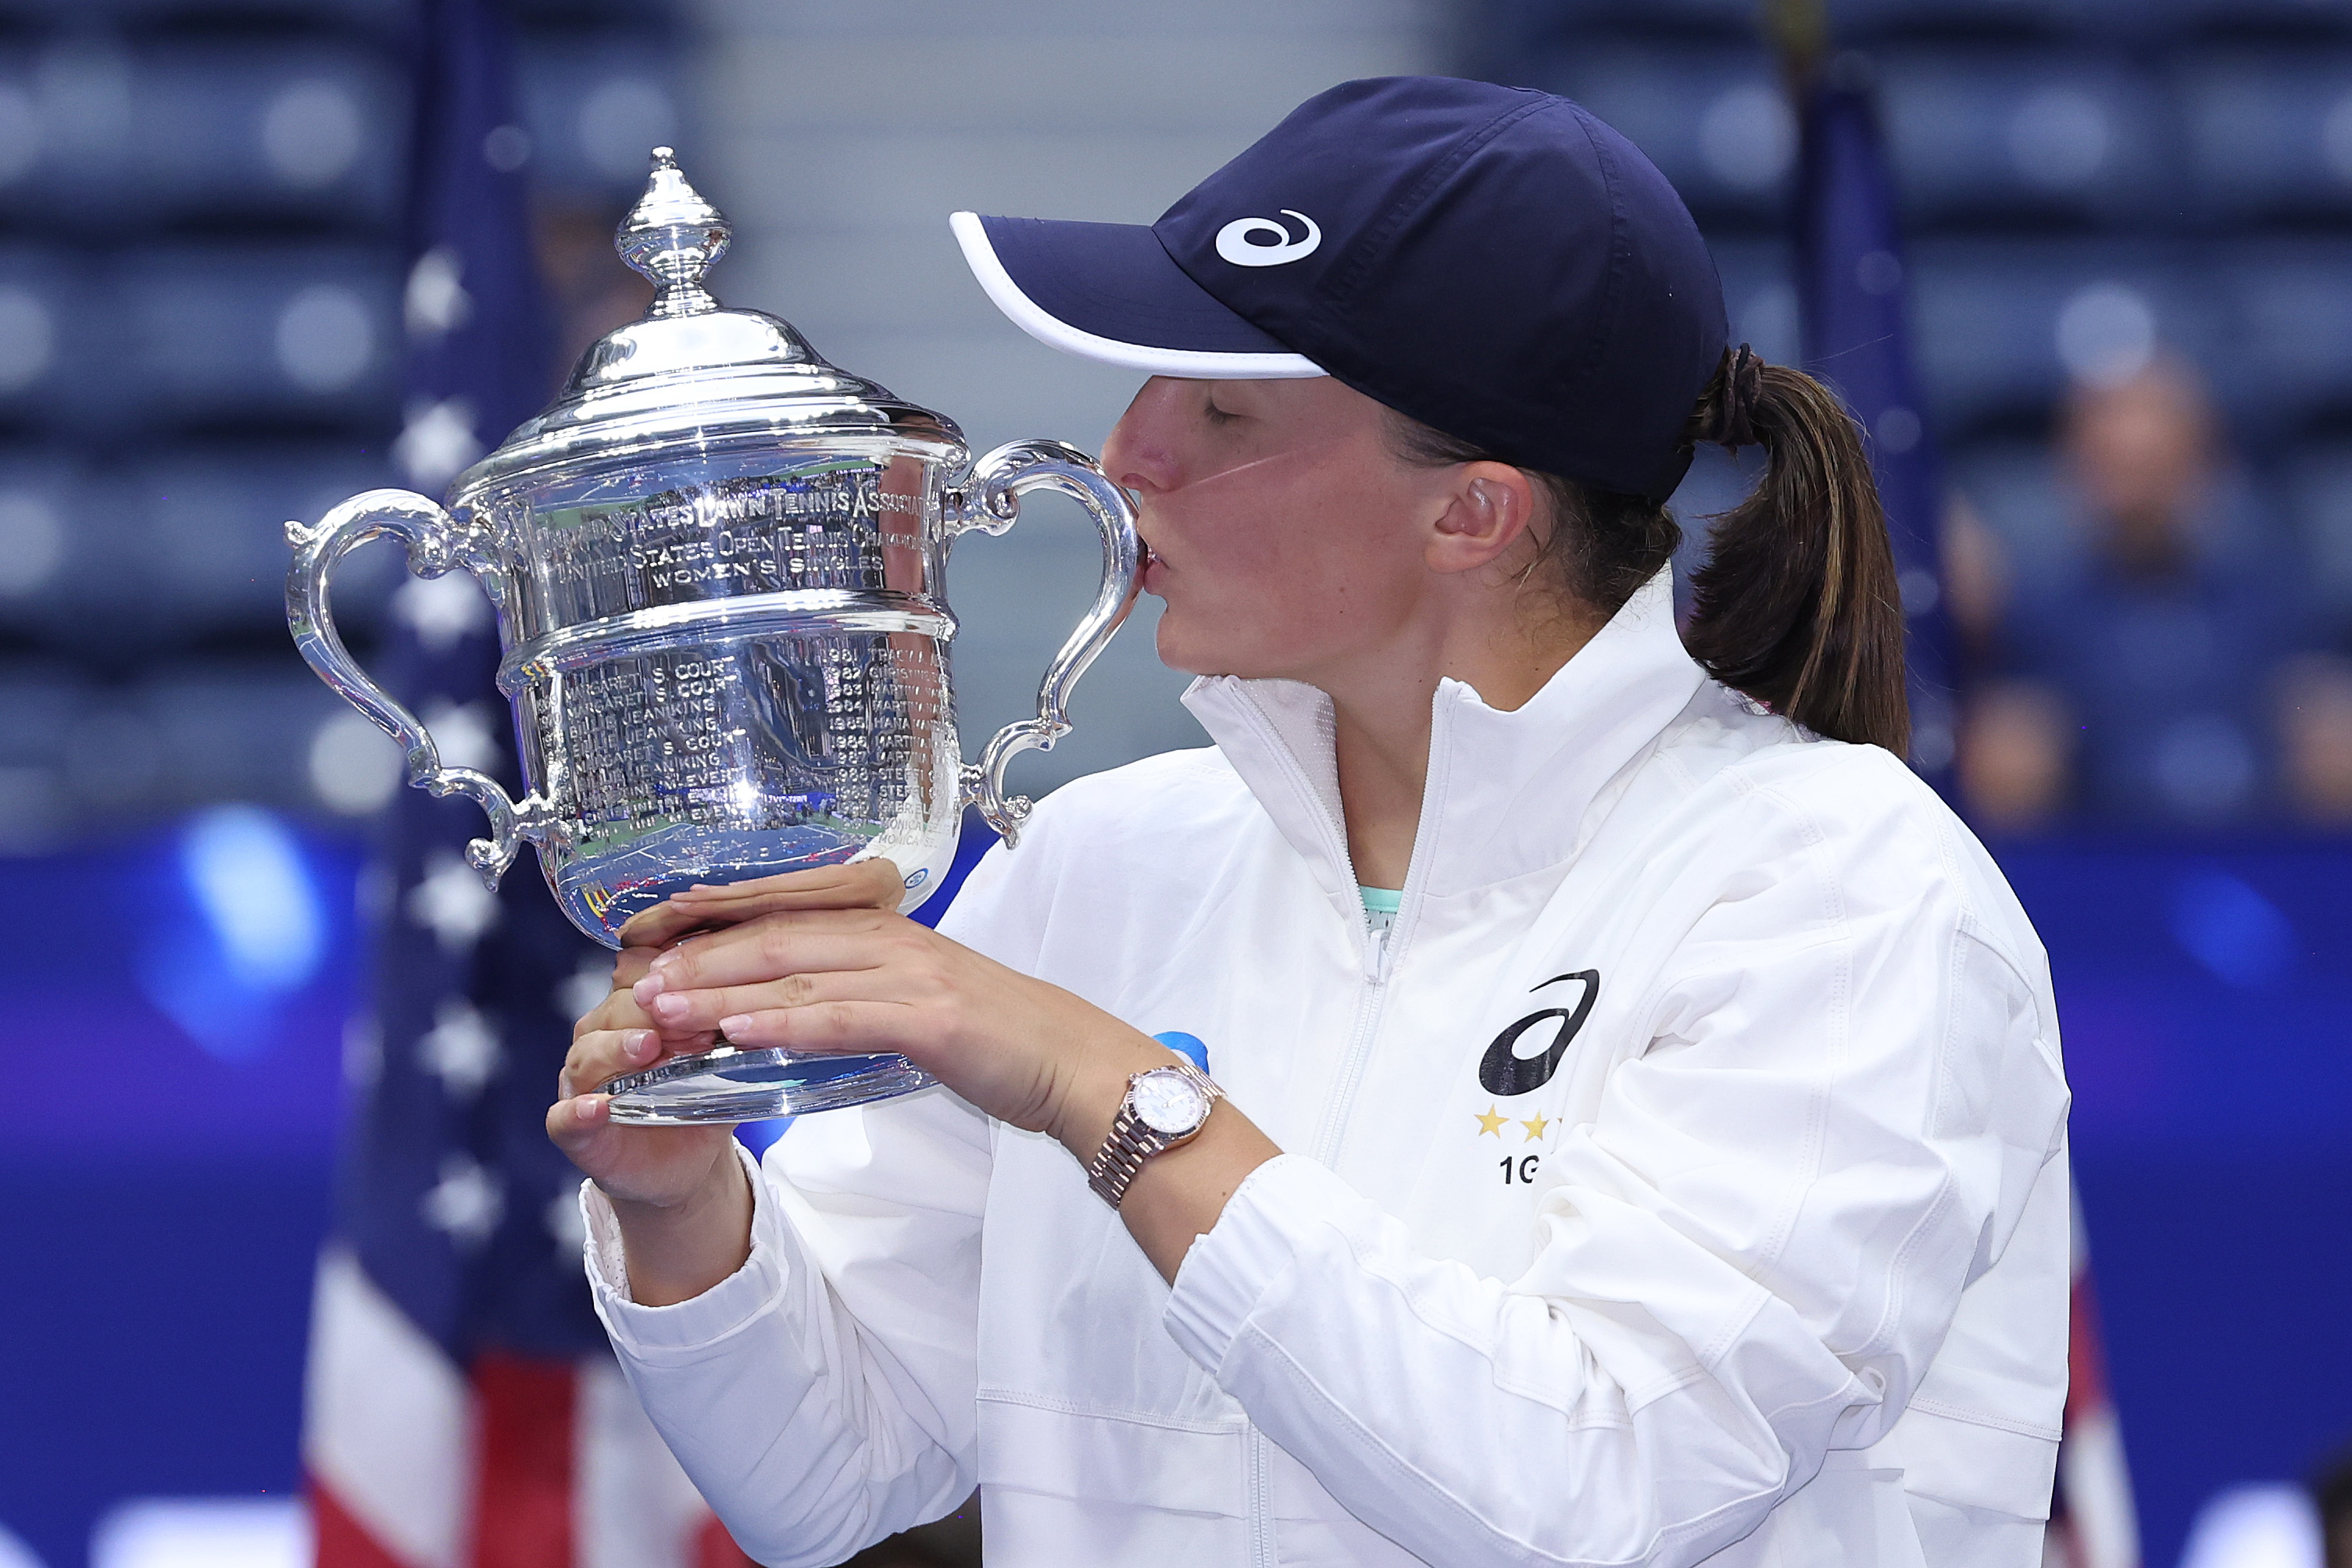 Iga Swiatek of Poland celebrates with the championship trophy after defeating Ons Jabeur of Tunisia during their Womens Singles Final match on Day Thirteen of the 2022 US Open at USTA Billie Jean King National Tennis Center on September 10, 2022 in the Flushing neighborhood of the Queens borough of New York City. (Photo by Matthew Stockman/Getty Images)